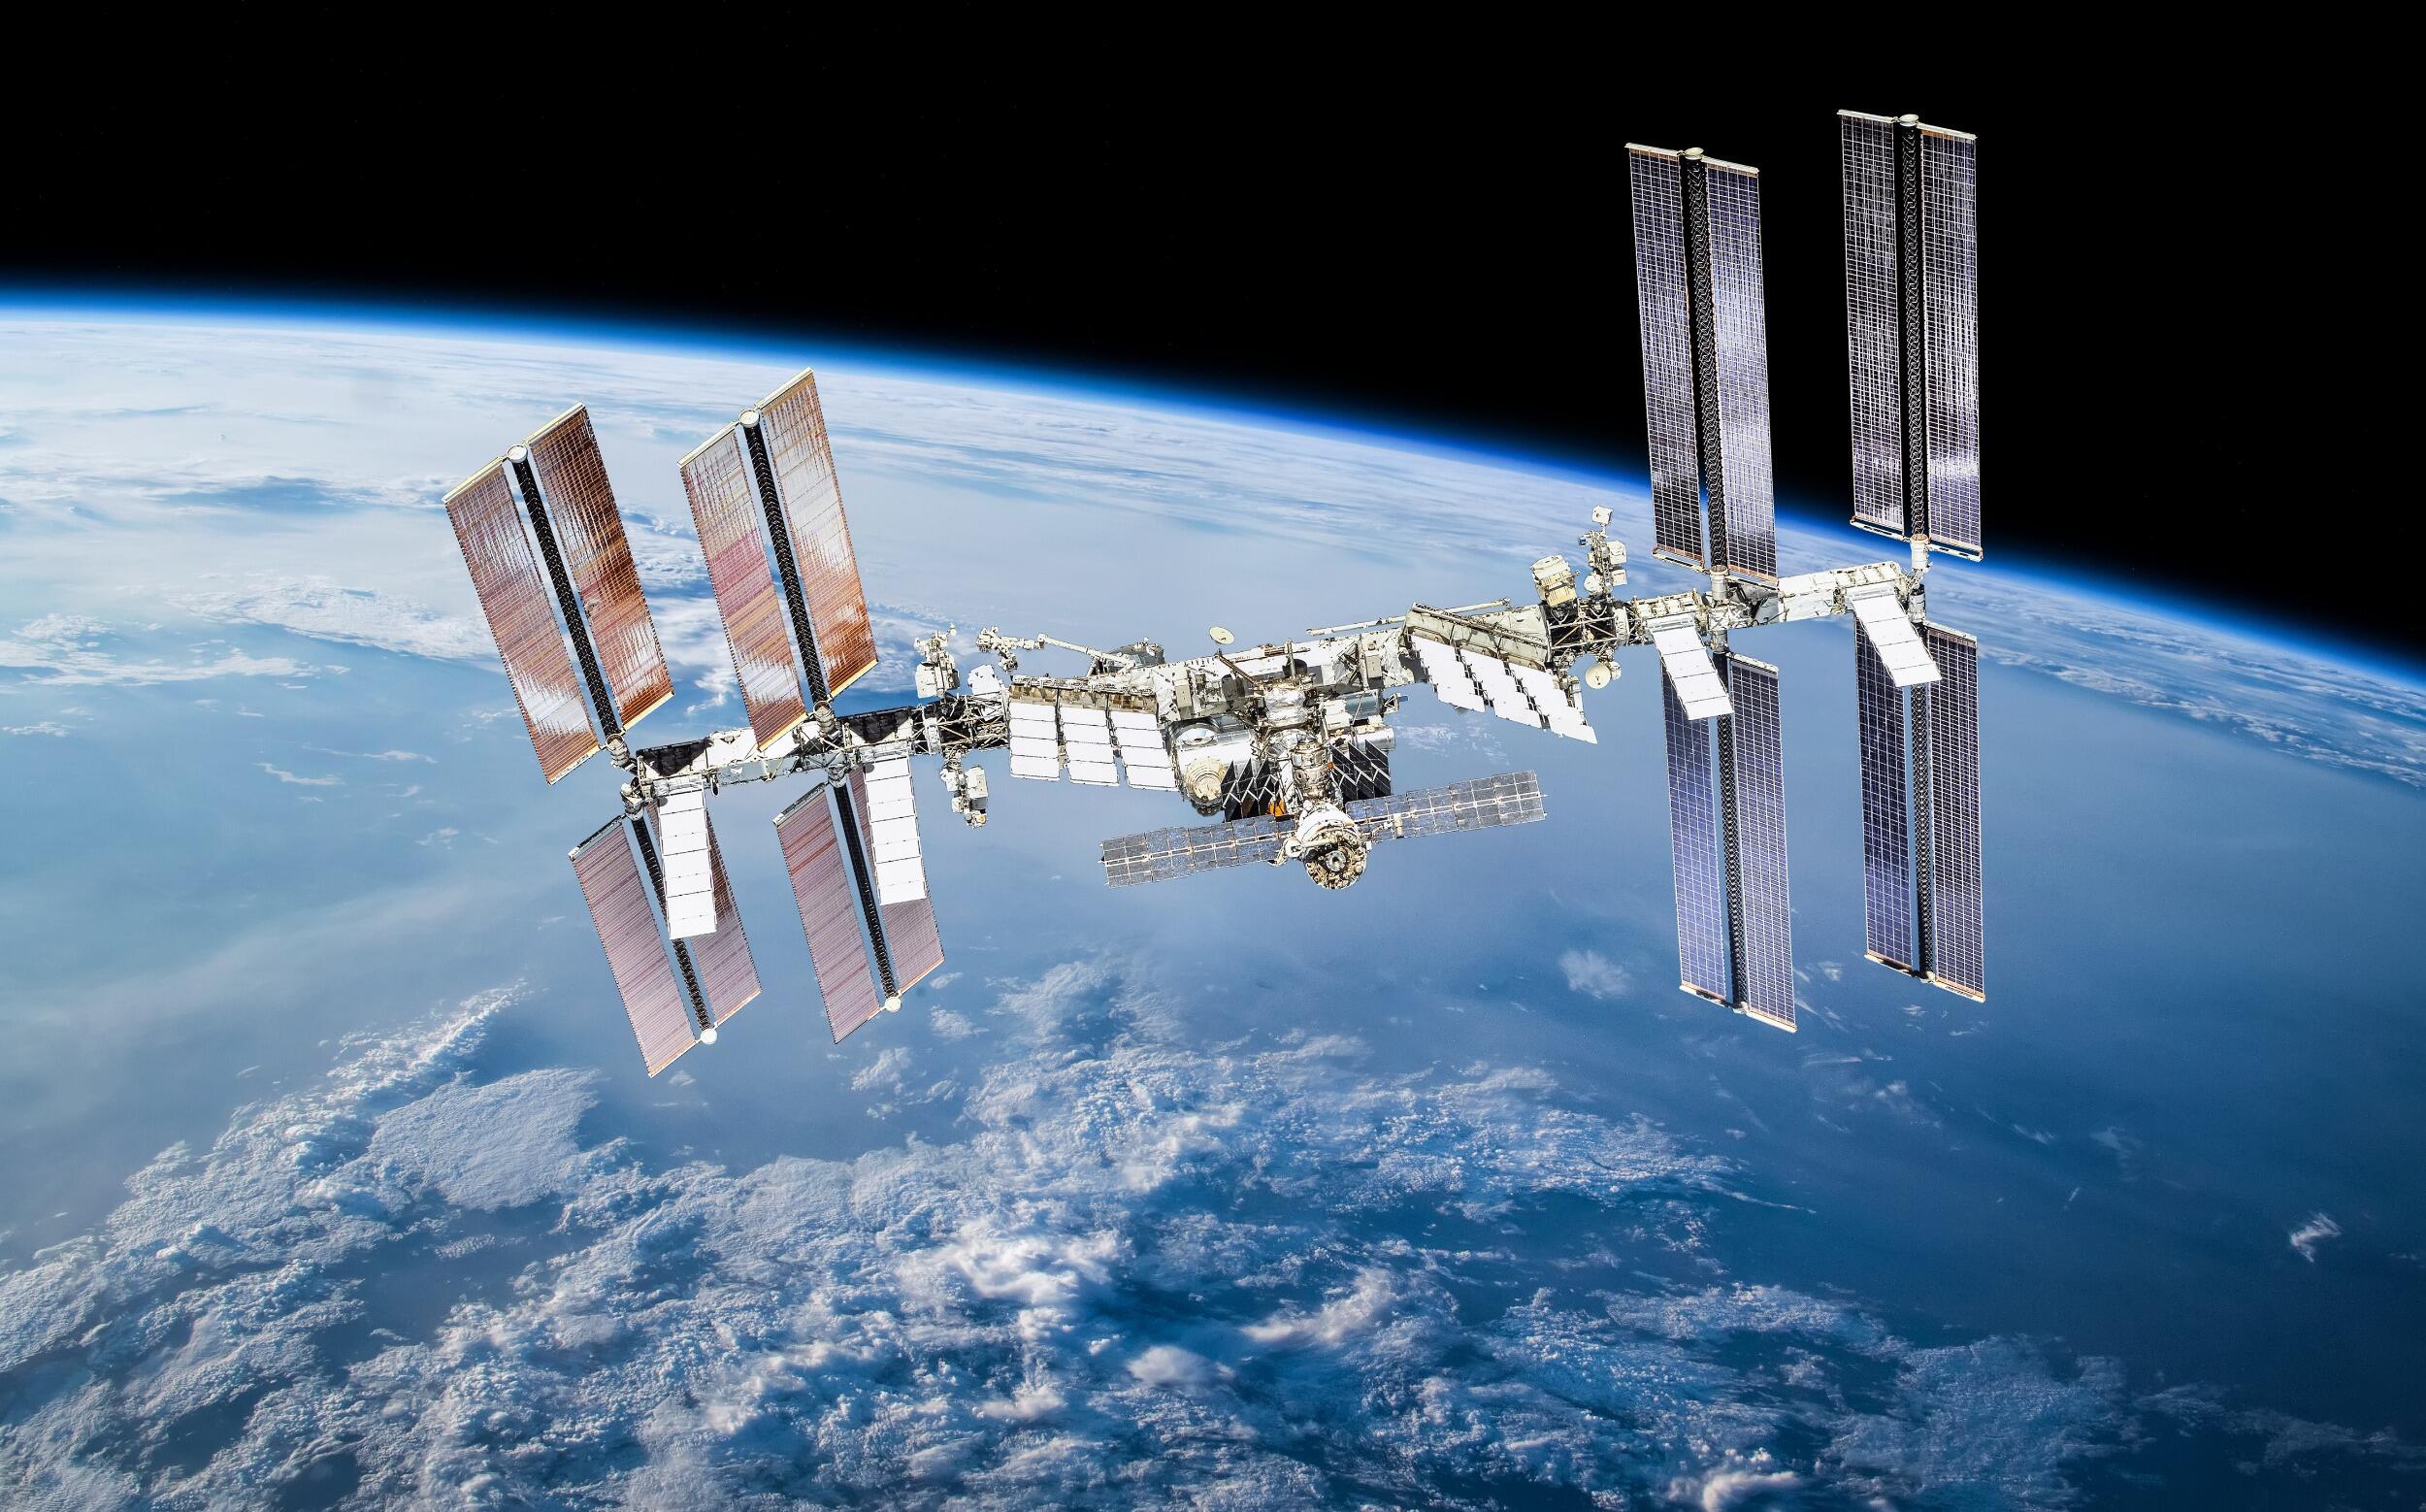 The international space station floating in space over the planet earth.